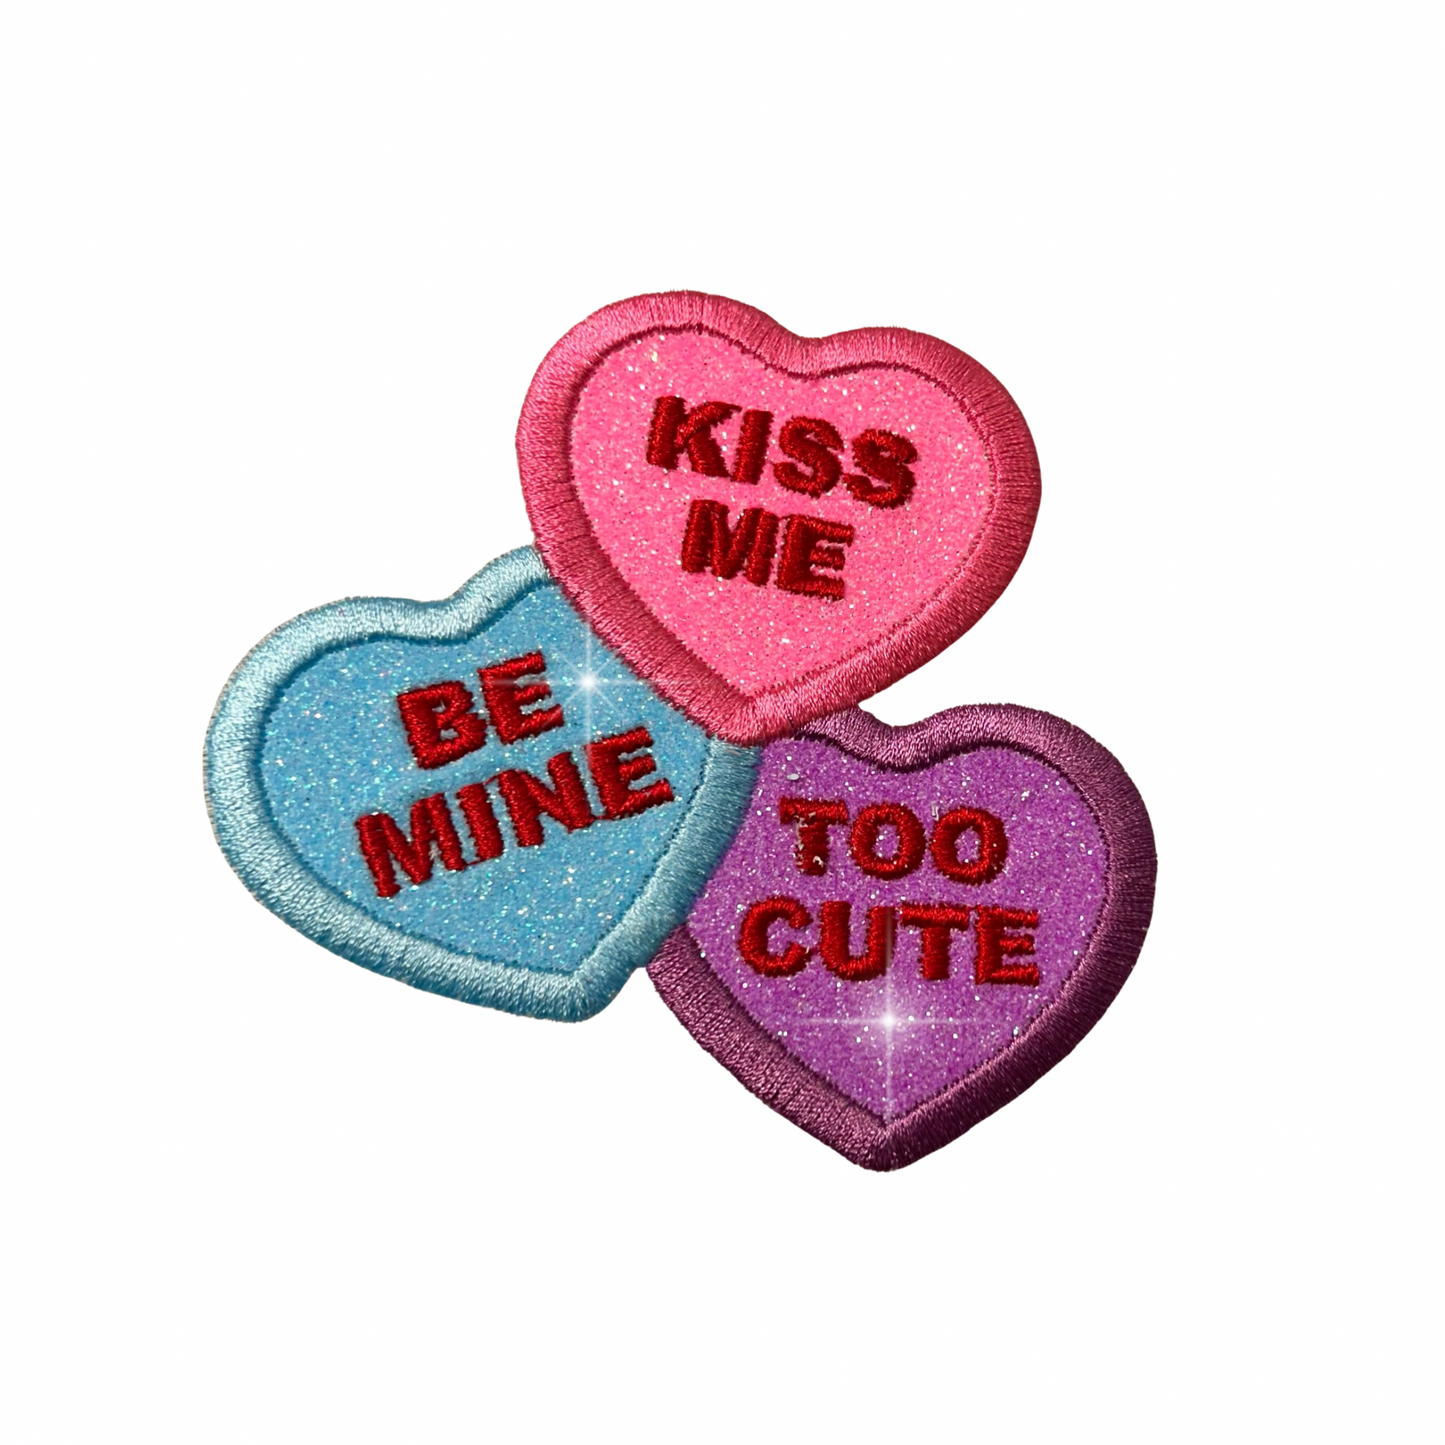 Conversation heart cluster Patch of the Week